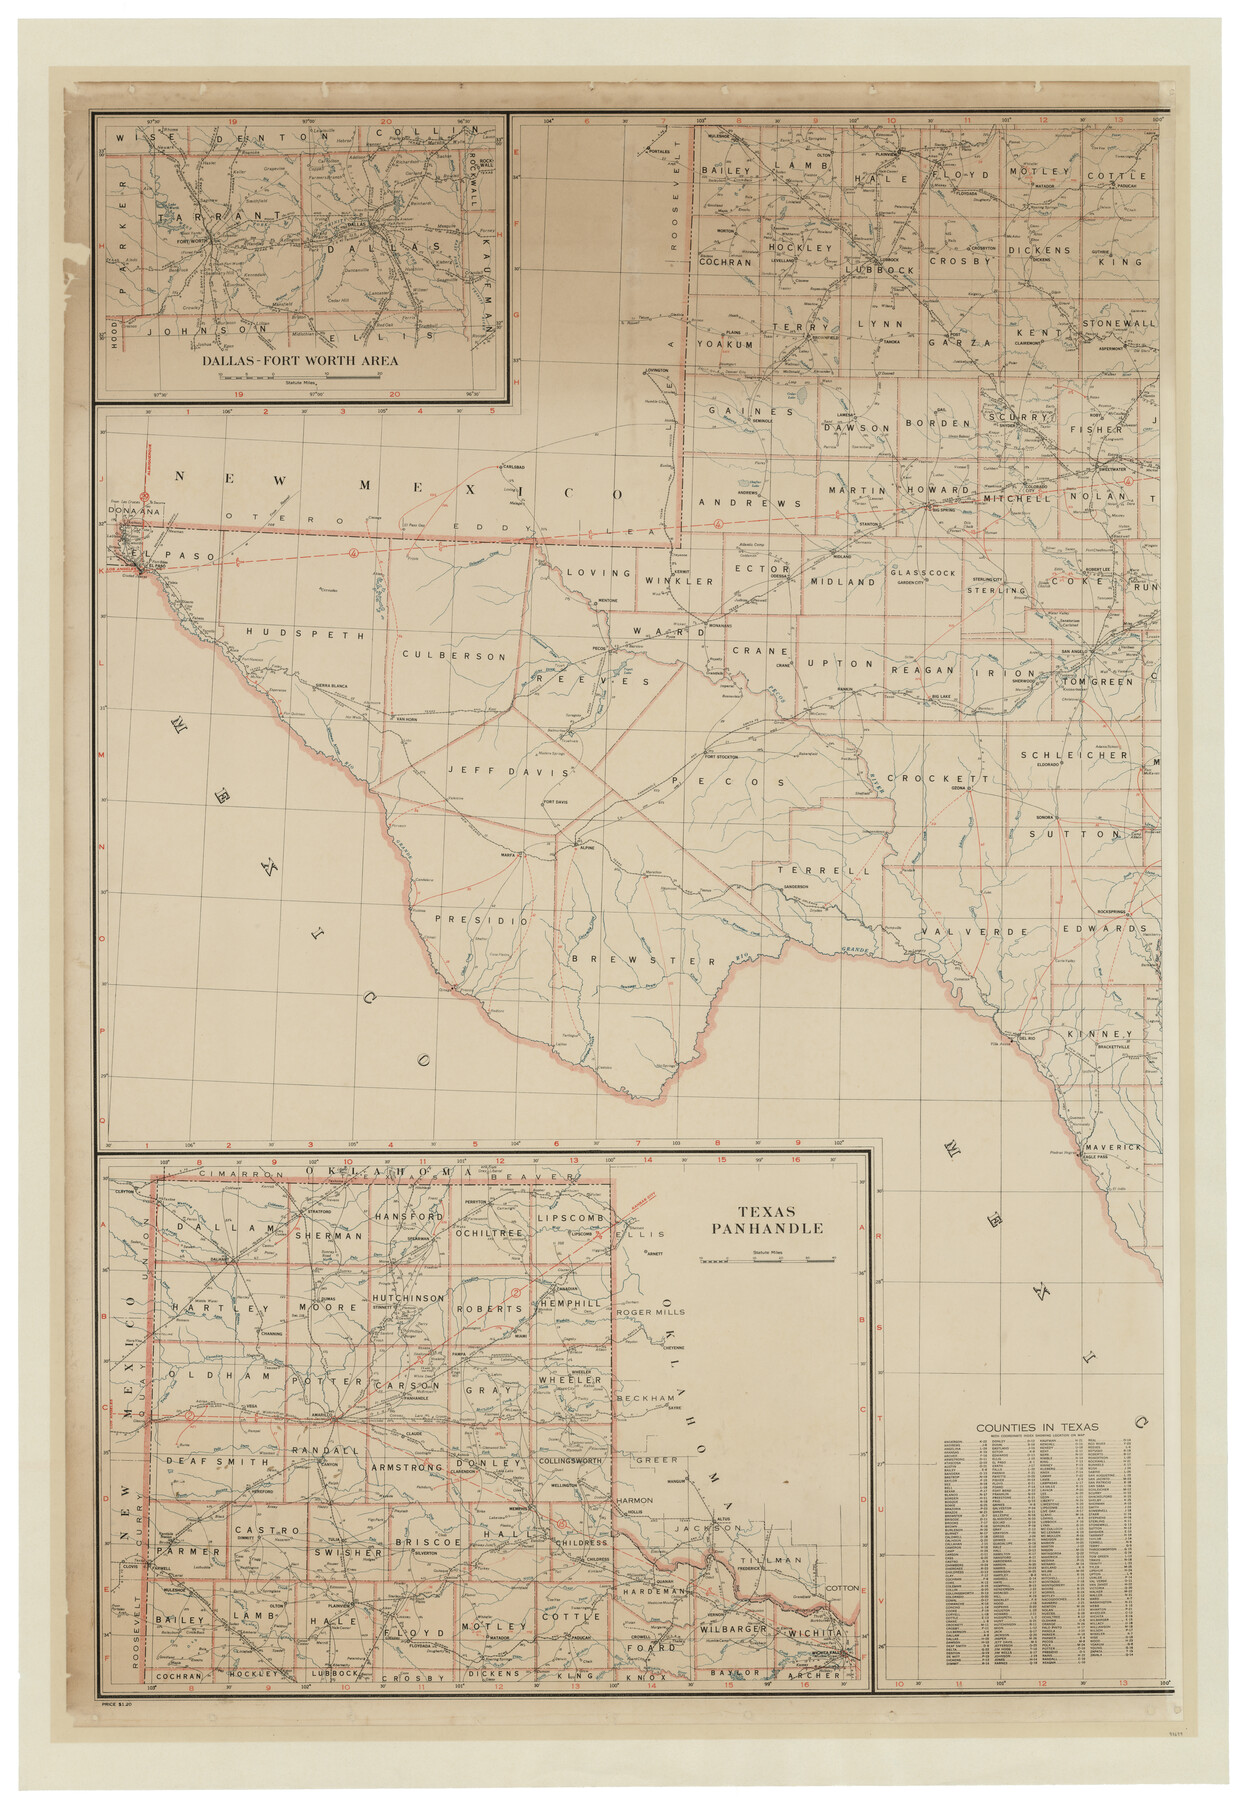 Post Route Map of Texas (Inset 1: Dallas-Fort Worth Area; Inset 2